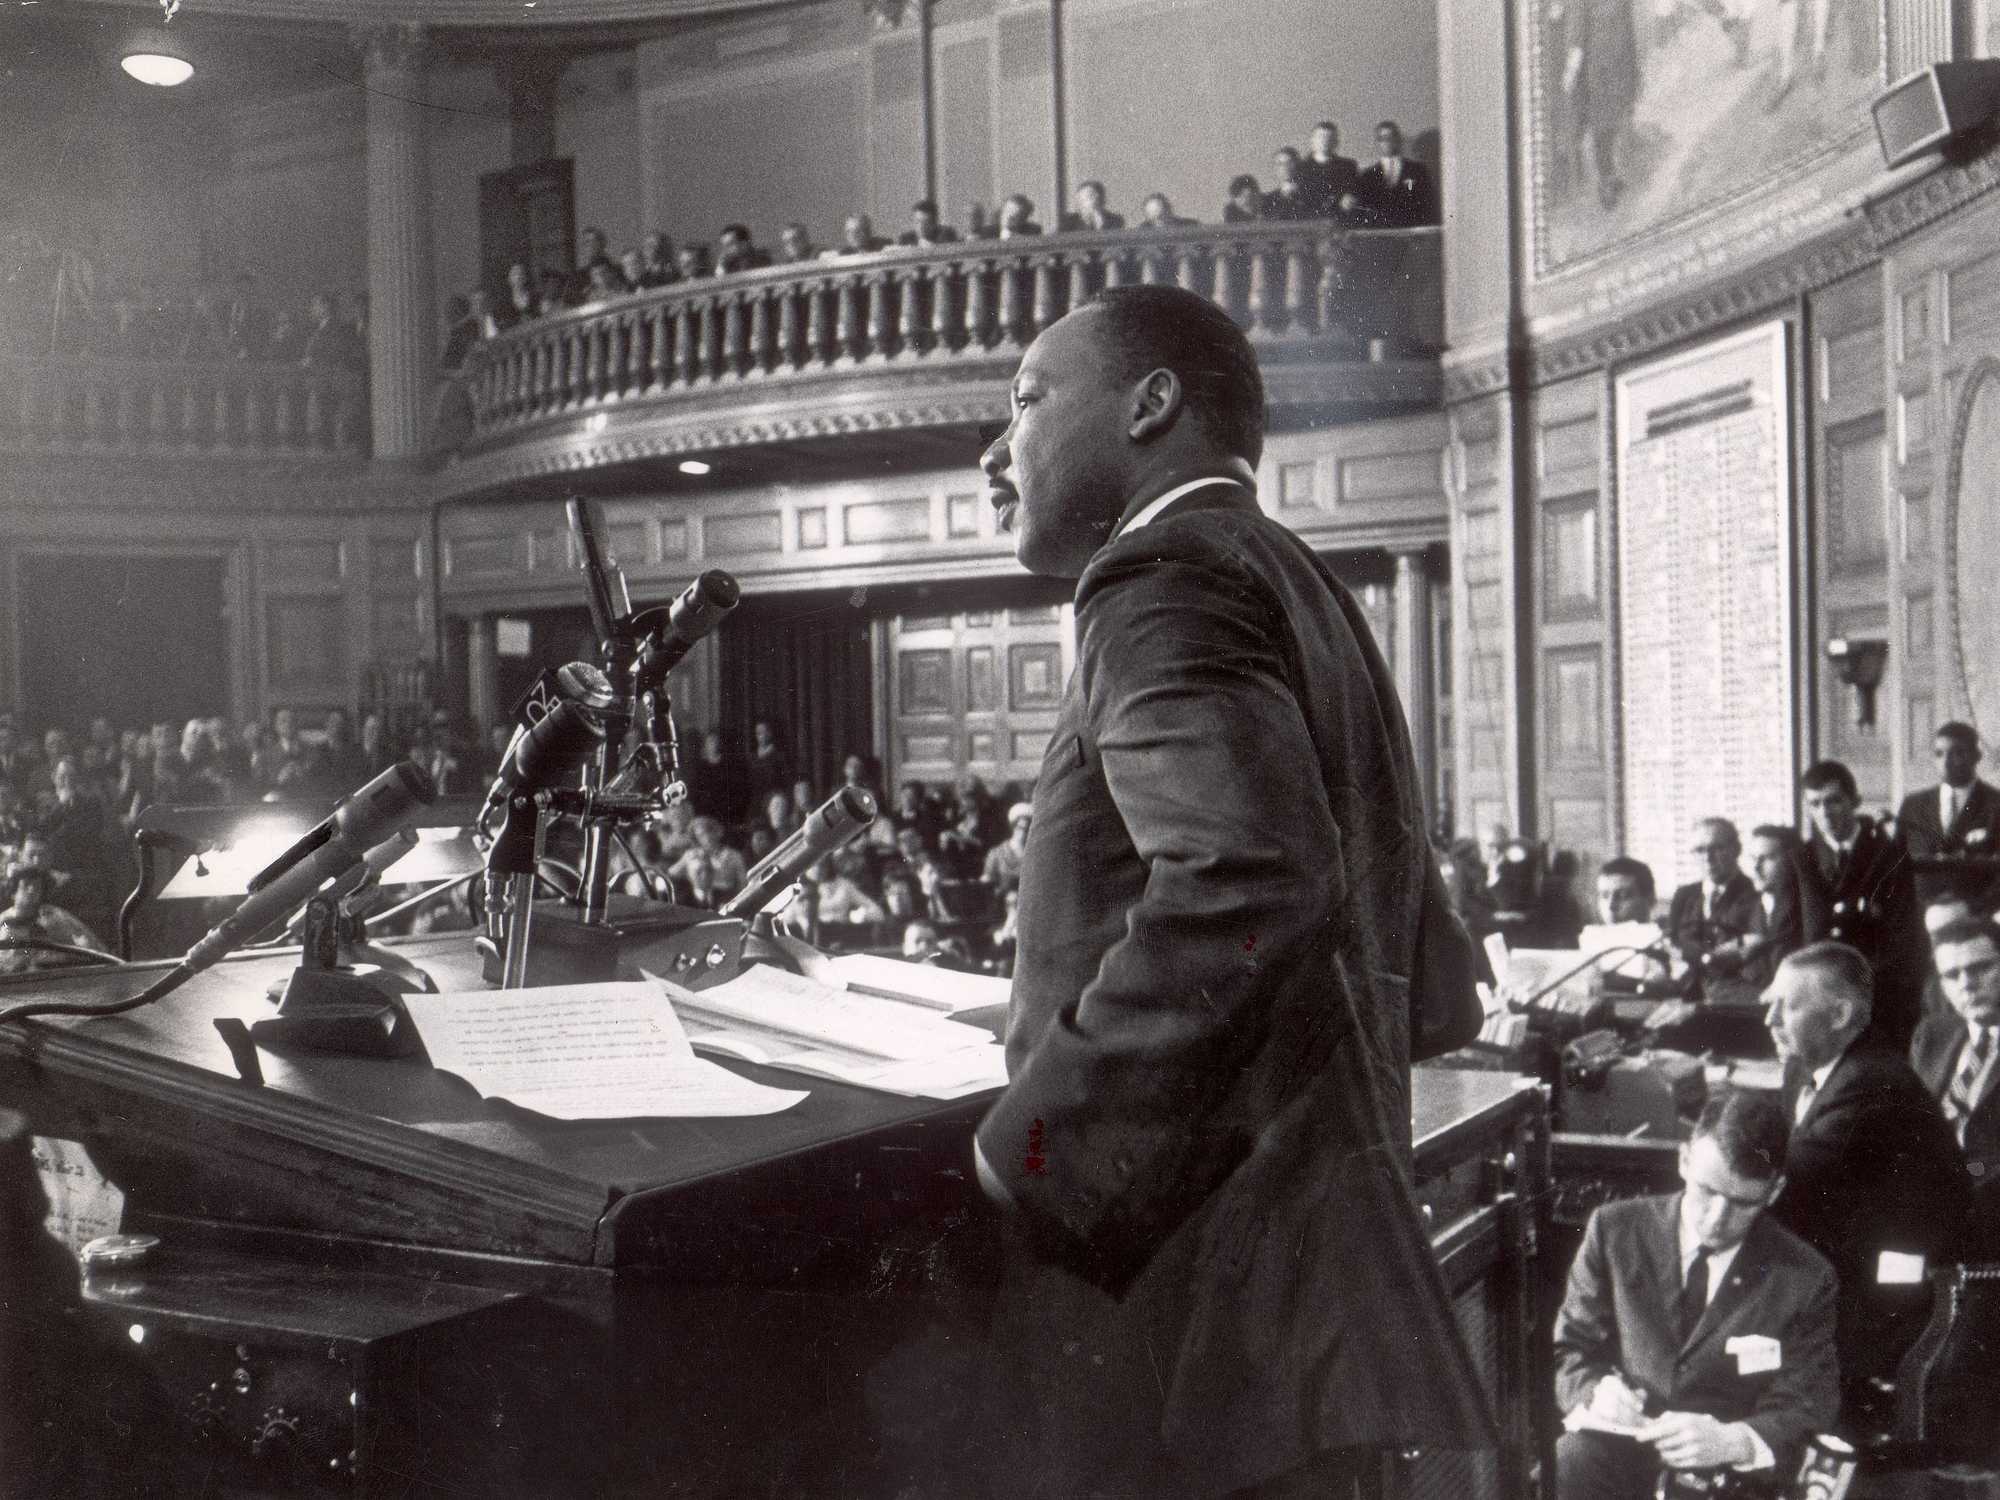 Dr. Martin Luther King Jr. speaking out against segregation at a joint session of the Massachusetts Legislature on April 22, 1965. King said he came to the Bay State not to condemn but to encourage, and warned "that from these halls liberty must be preserved."